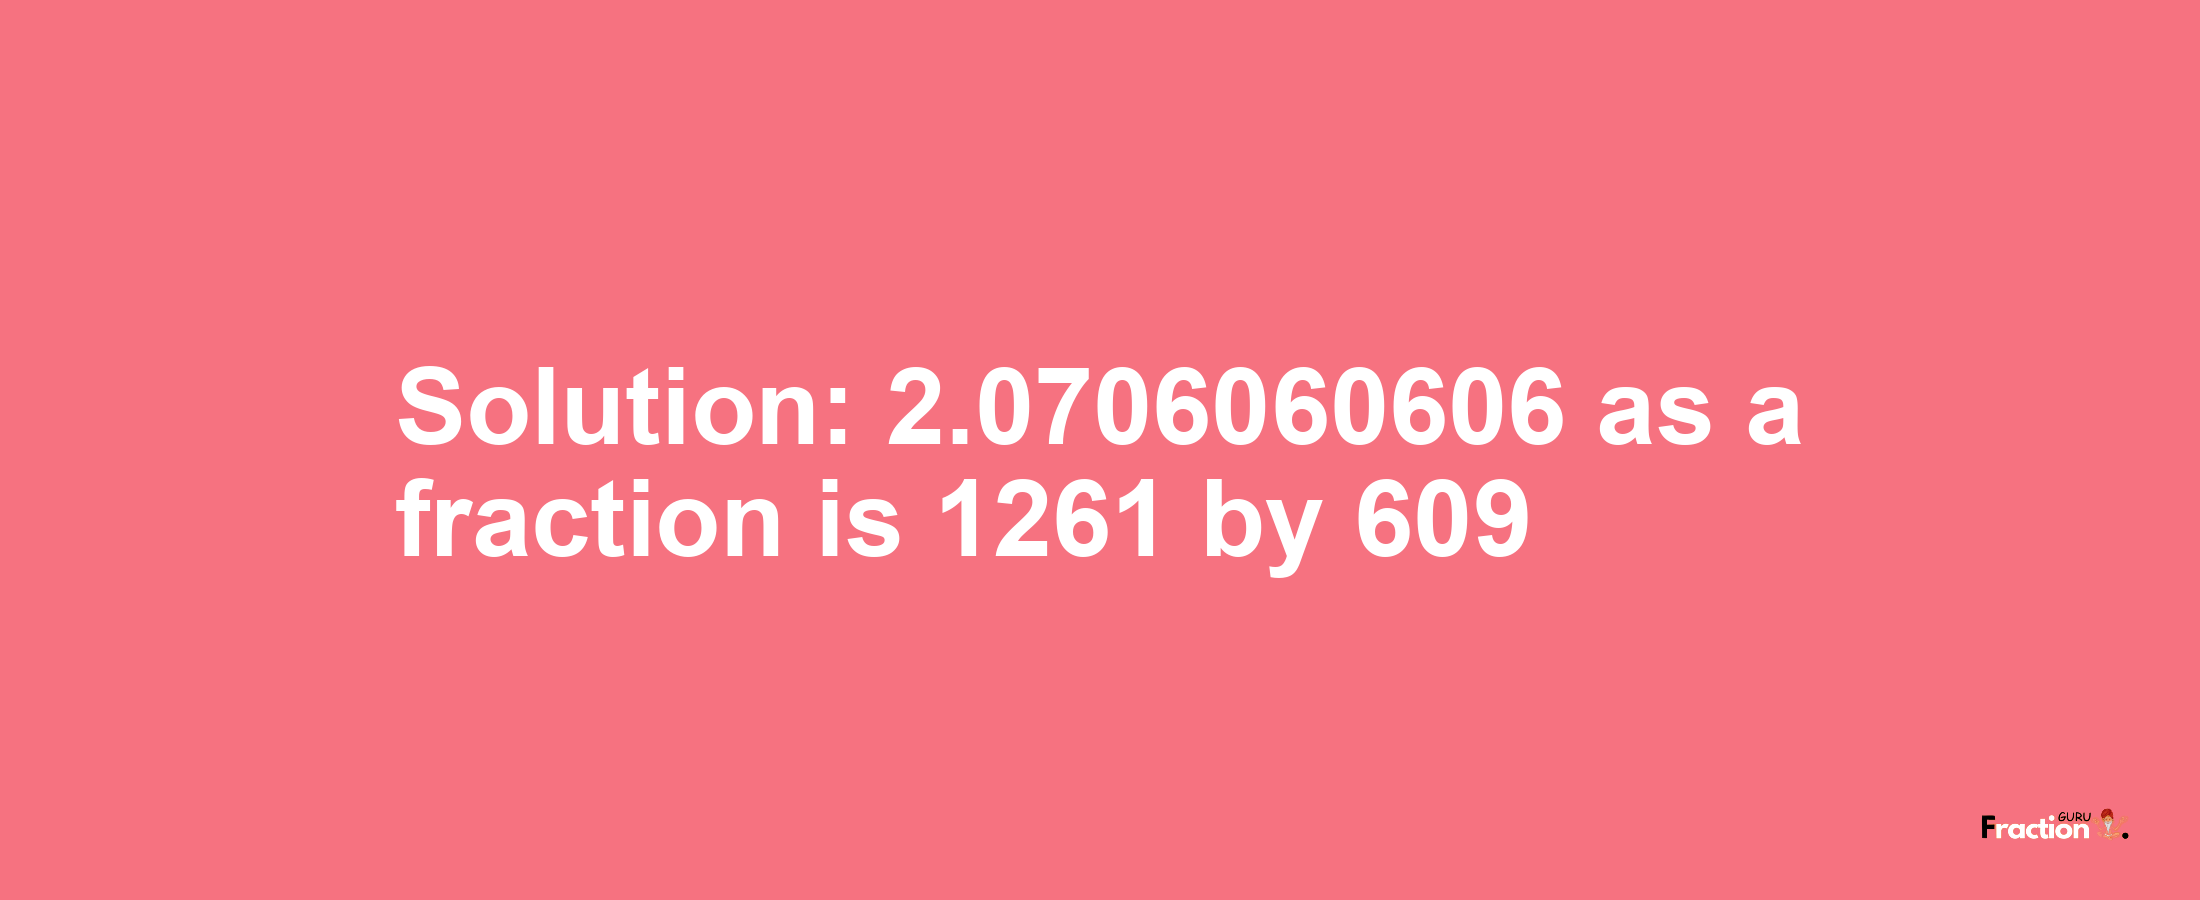 Solution:2.0706060606 as a fraction is 1261/609